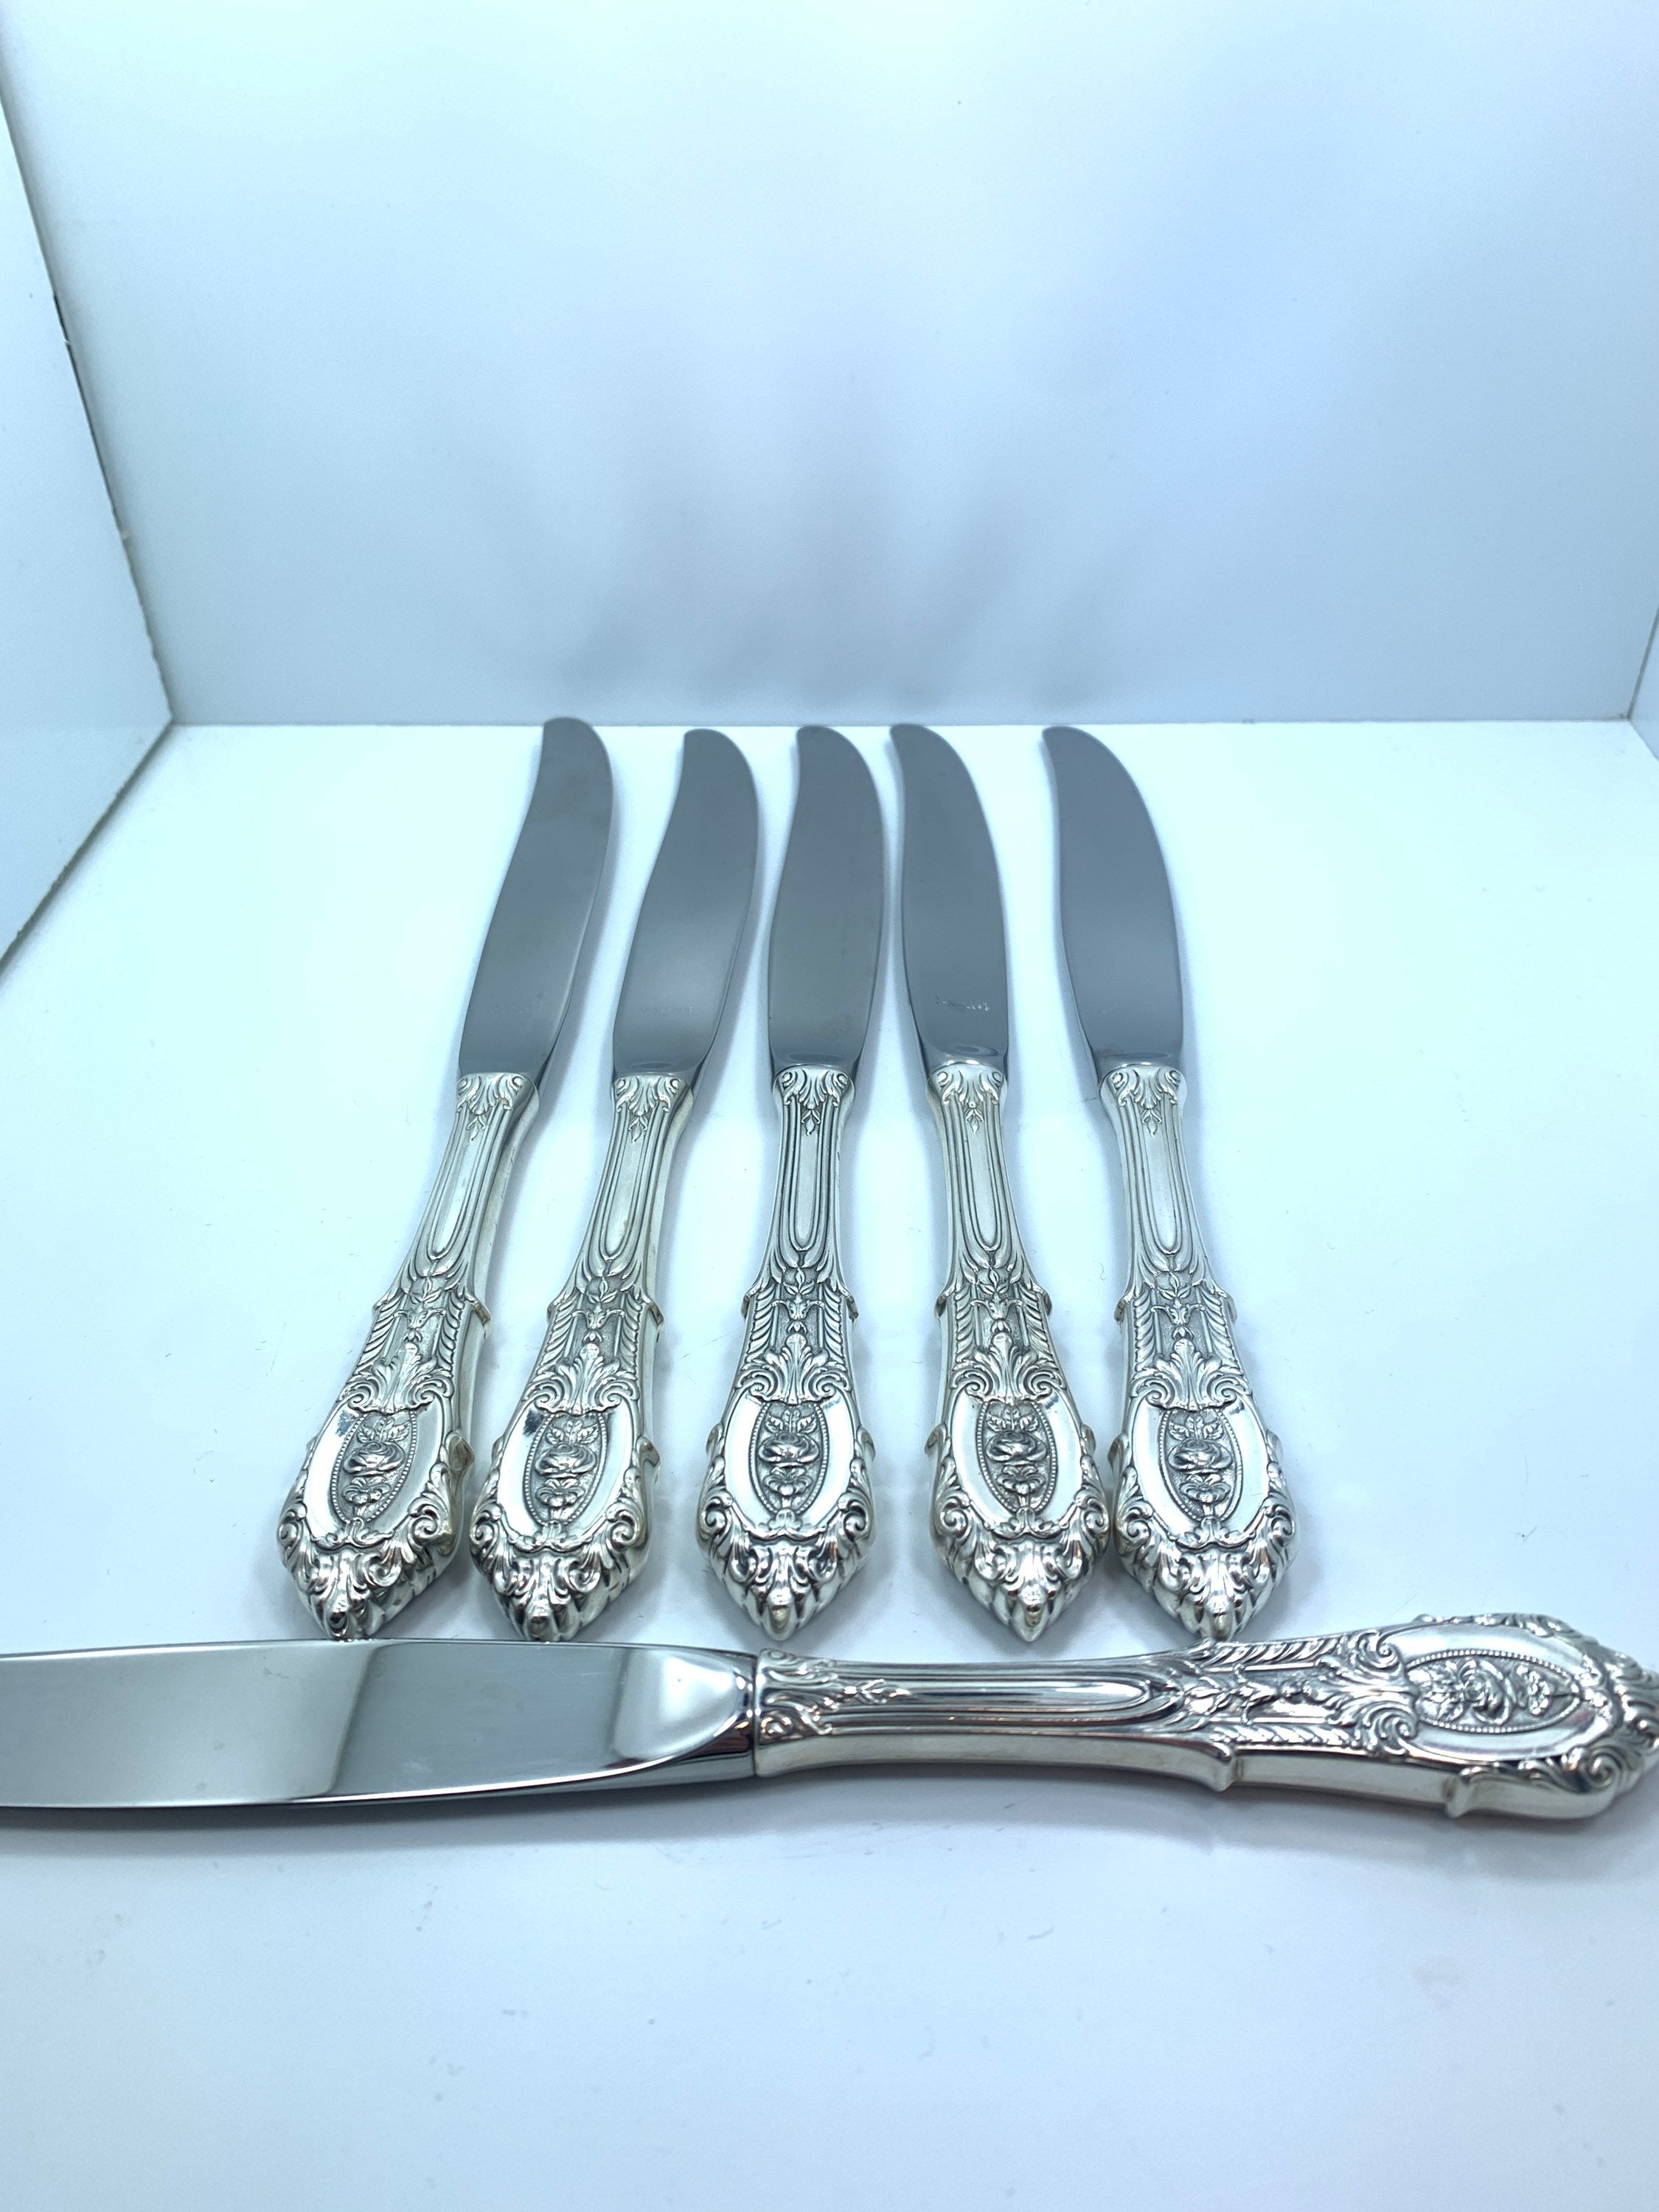 9" SIR CHRISTOPHER MODERN HOLLOW ONE EACH WALLACE STERLING SILVER DINNER KNIFE 